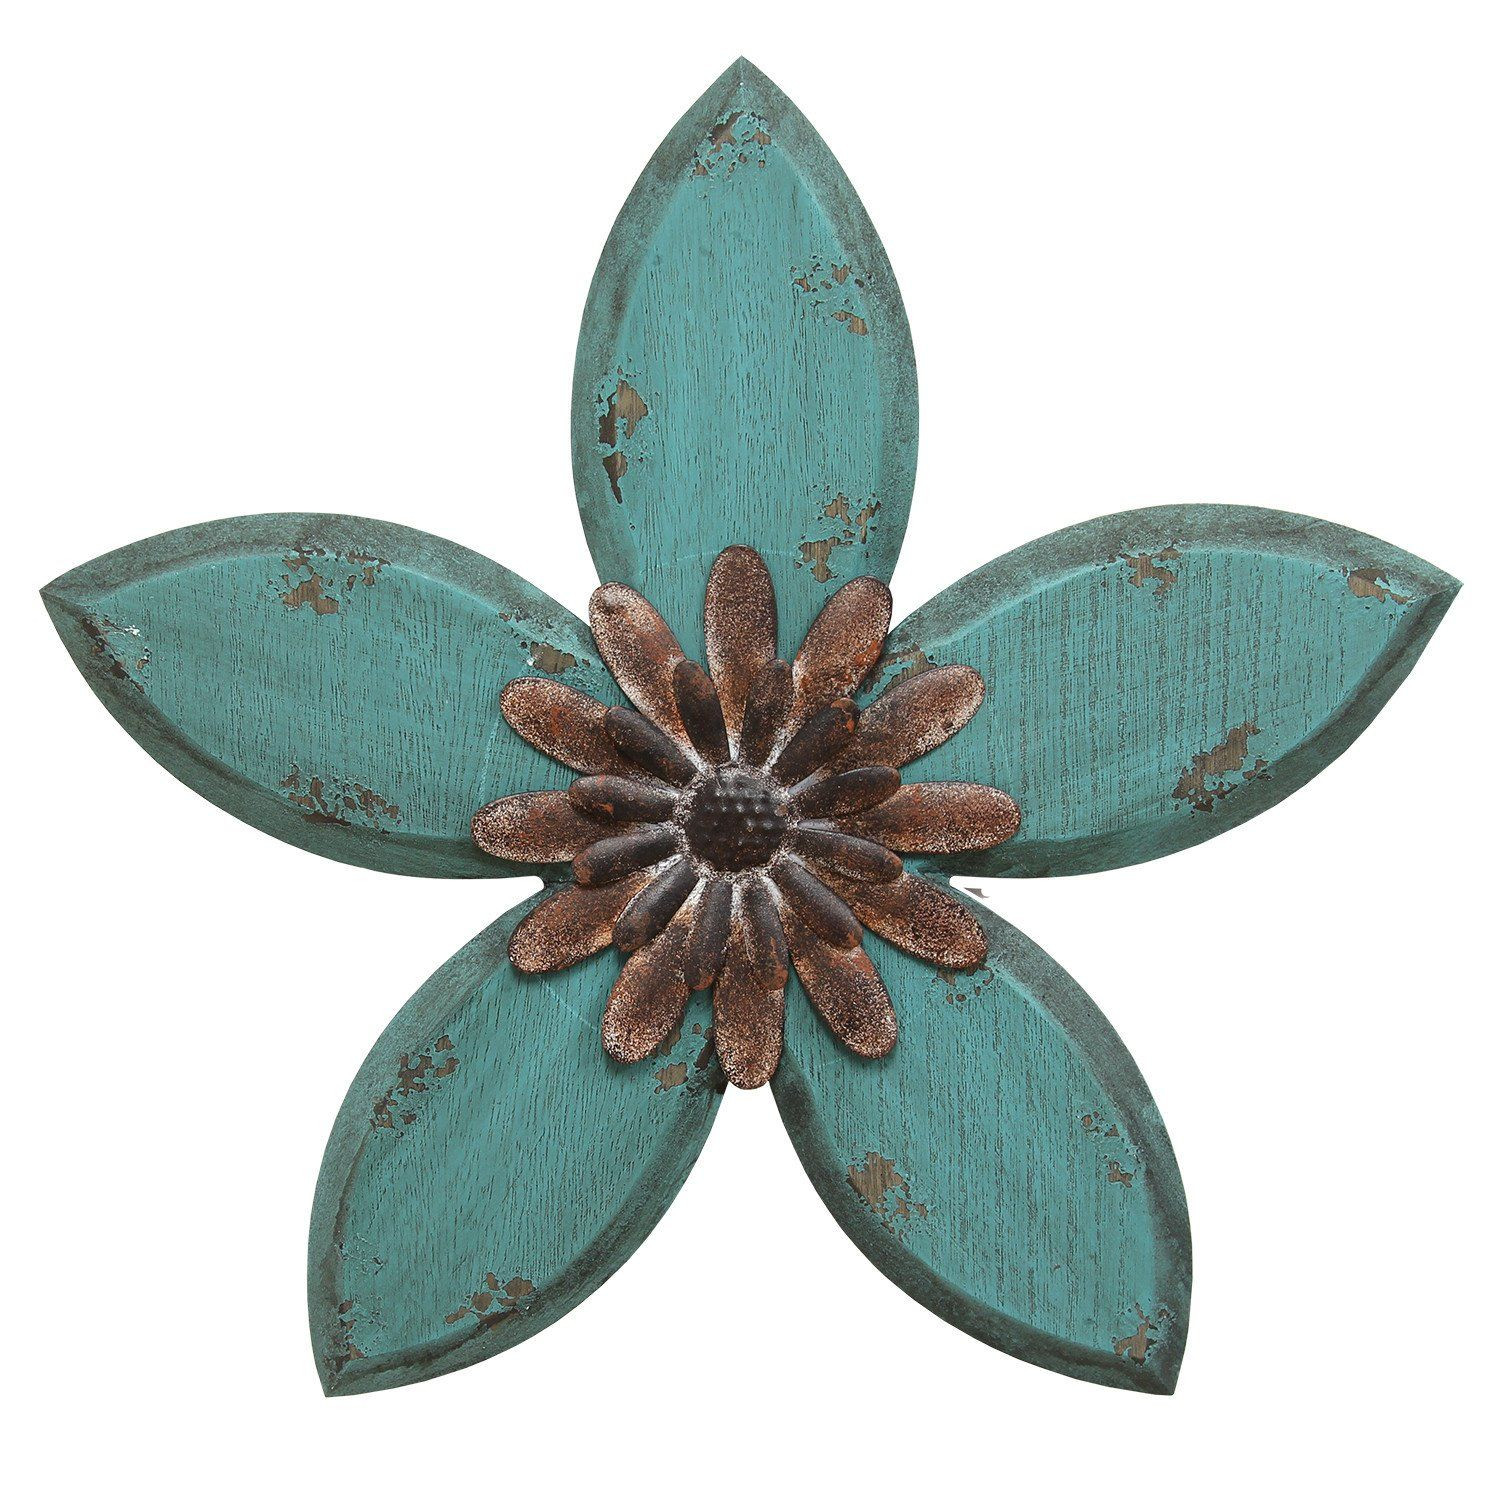 Distressed Teal And Red Antique Flower Metalwall Decor